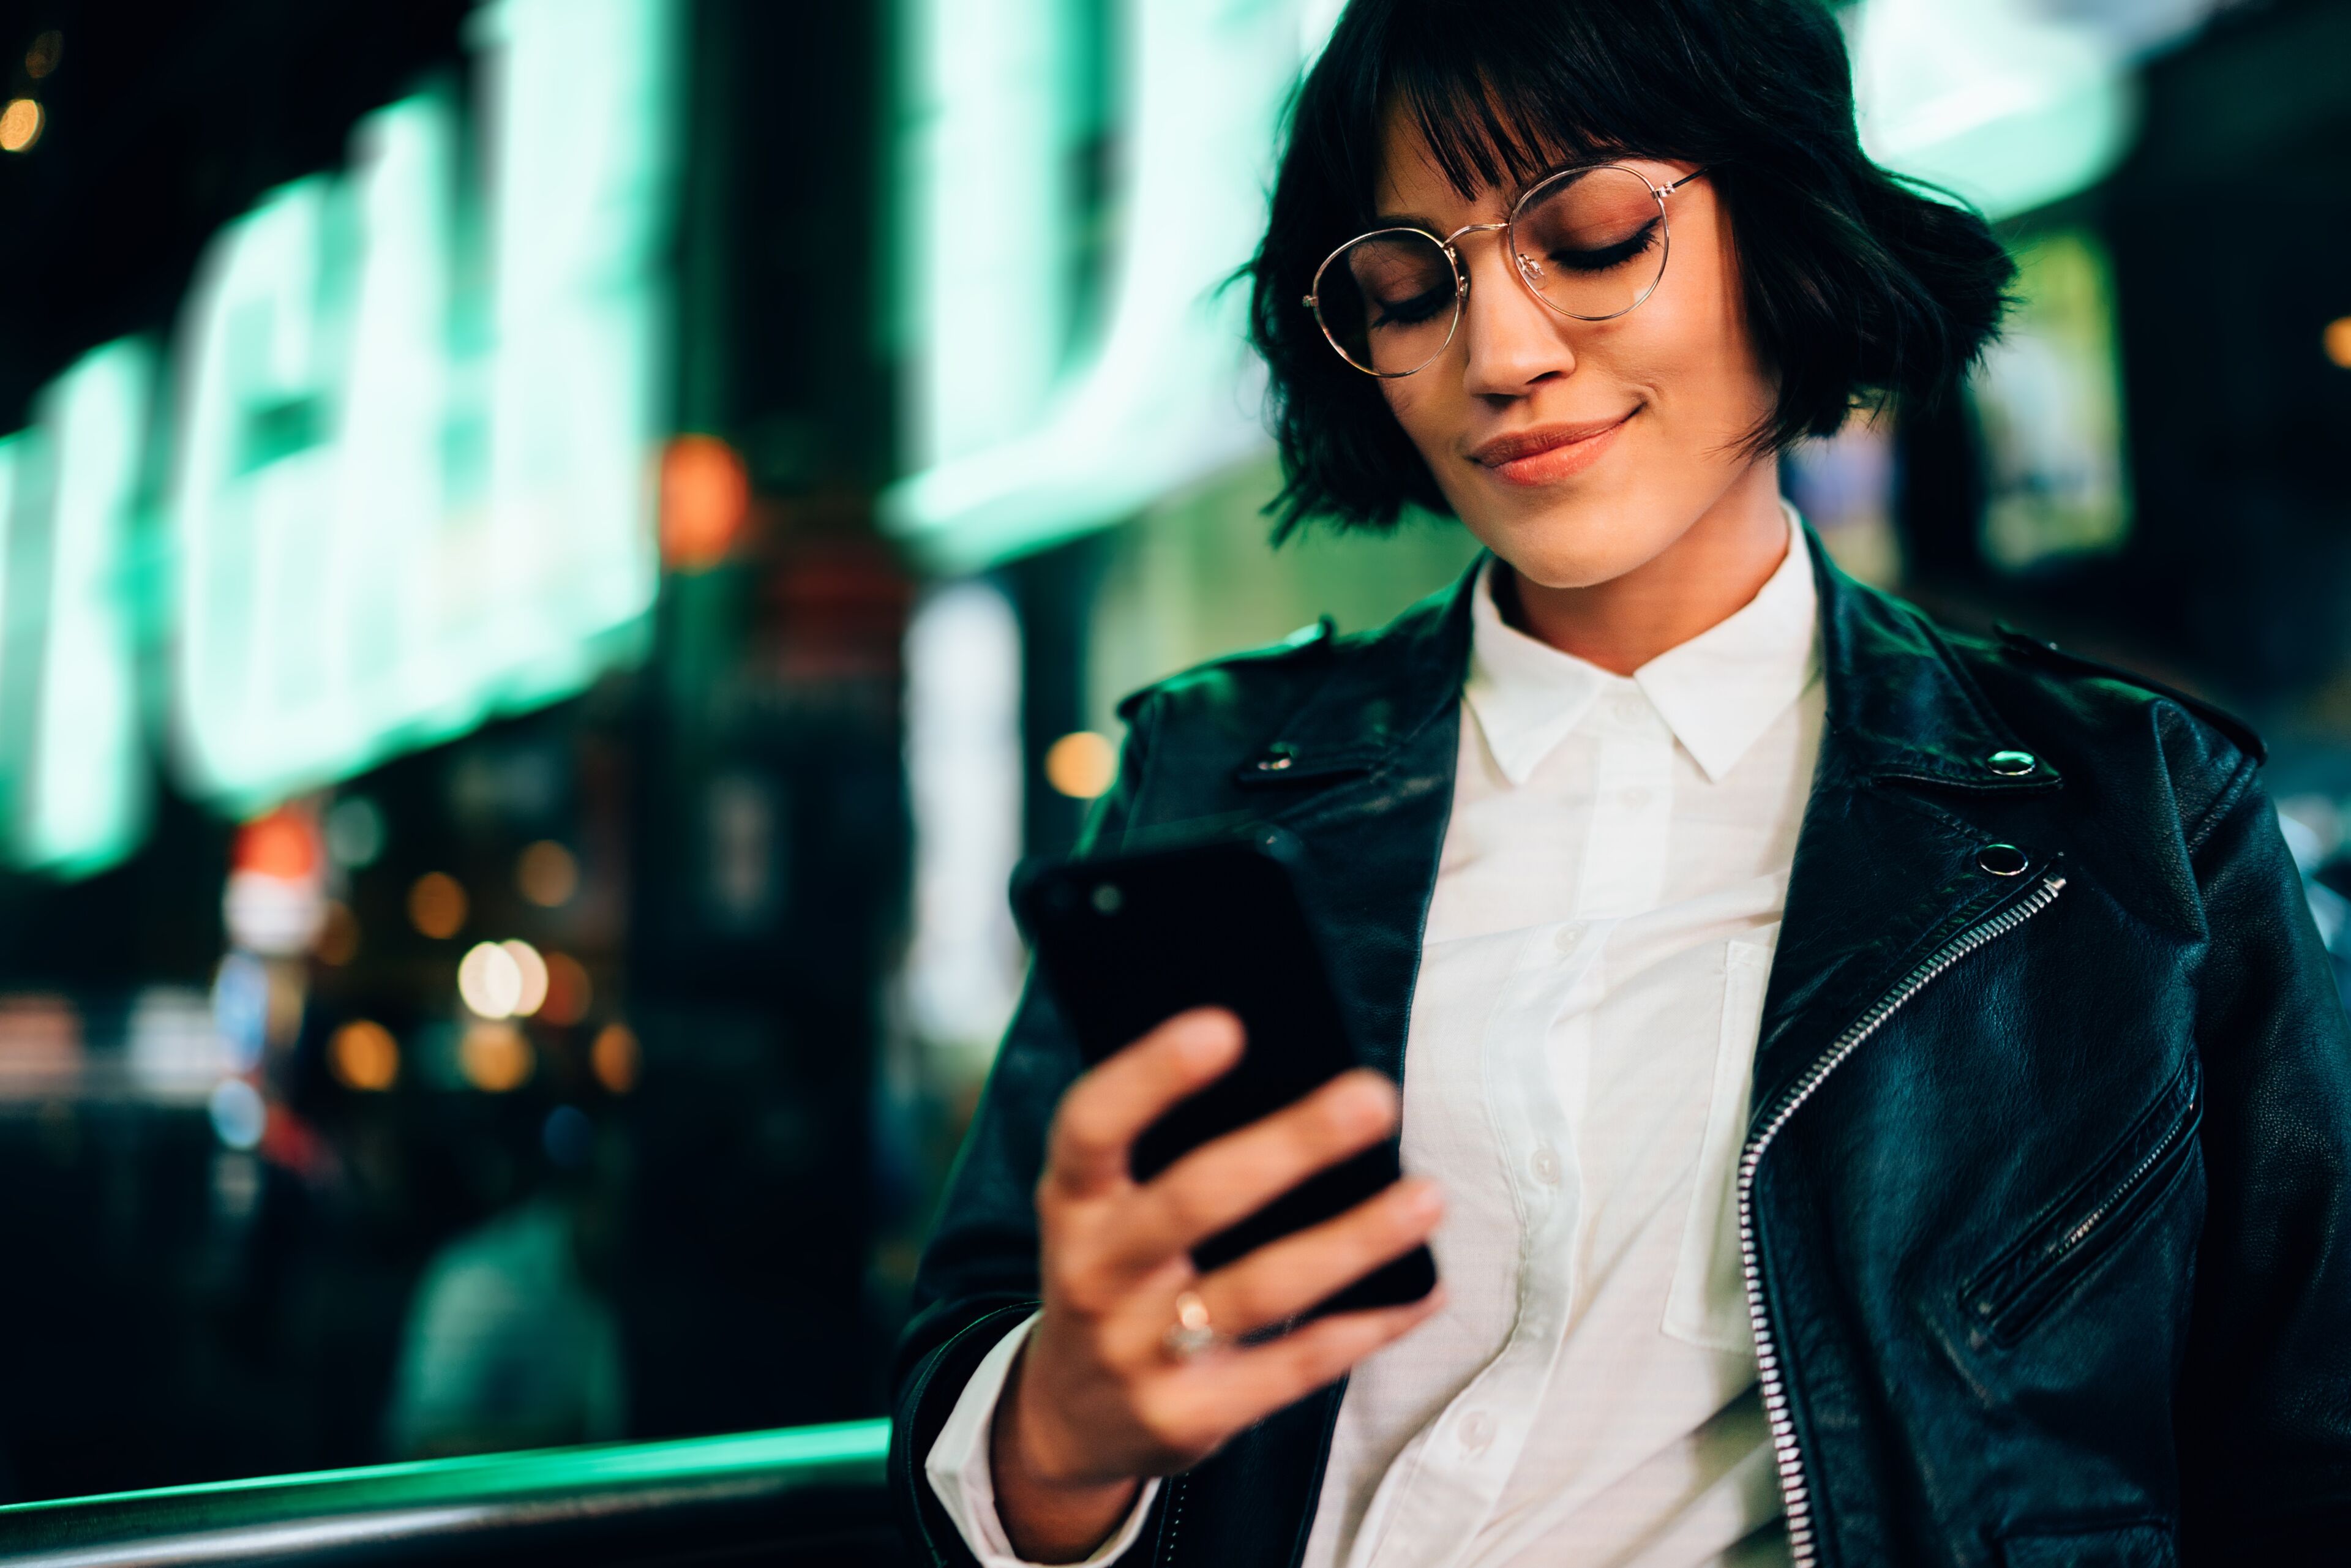 A young woman in a leather jacket and round glasses is focused on her smartphone, with bright city lights blurred in the background.